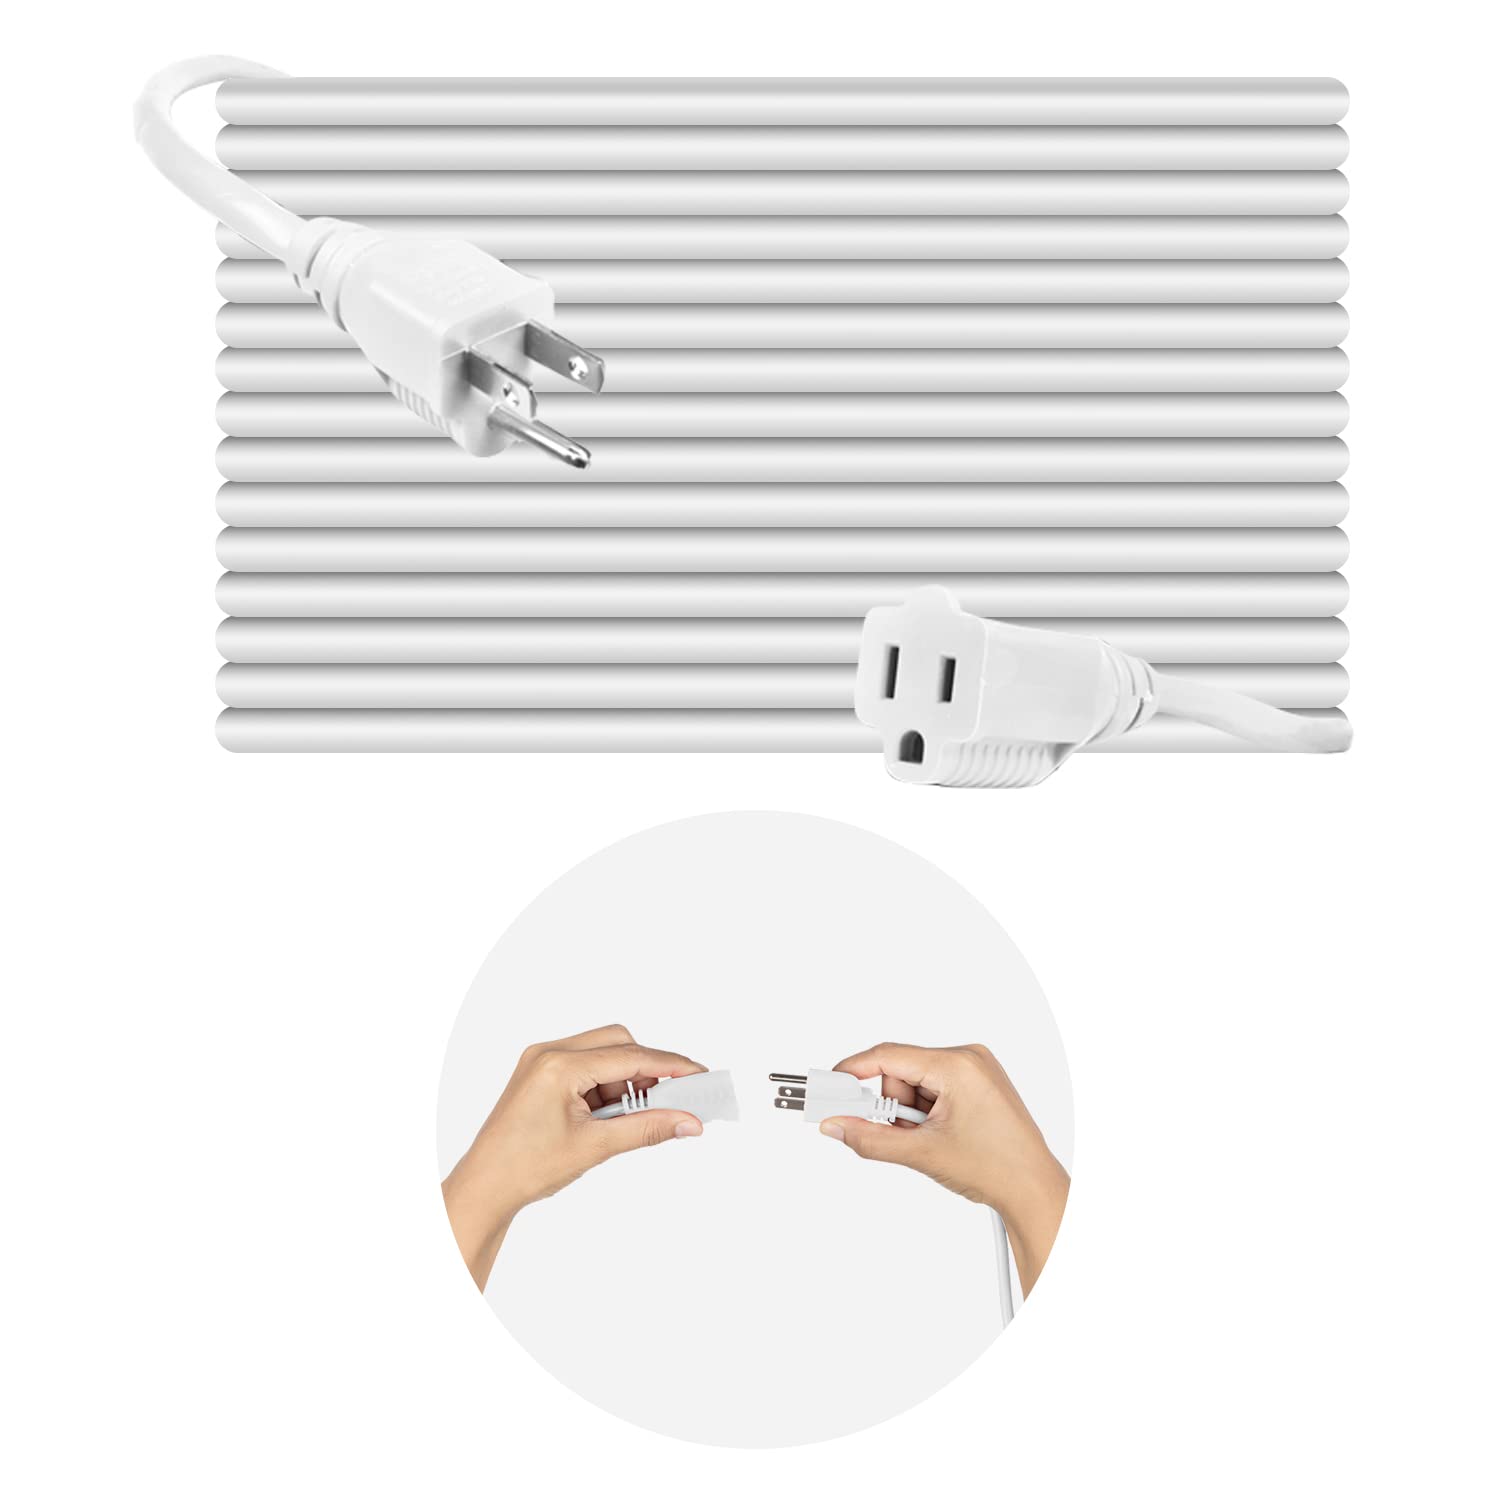 BindMaster Heavy Duty Extension Cord/Wire Power Cable, Indoor/Outdoor, 16/3, Single Outlet, 30 Feet, UL Listed, White  - Like New